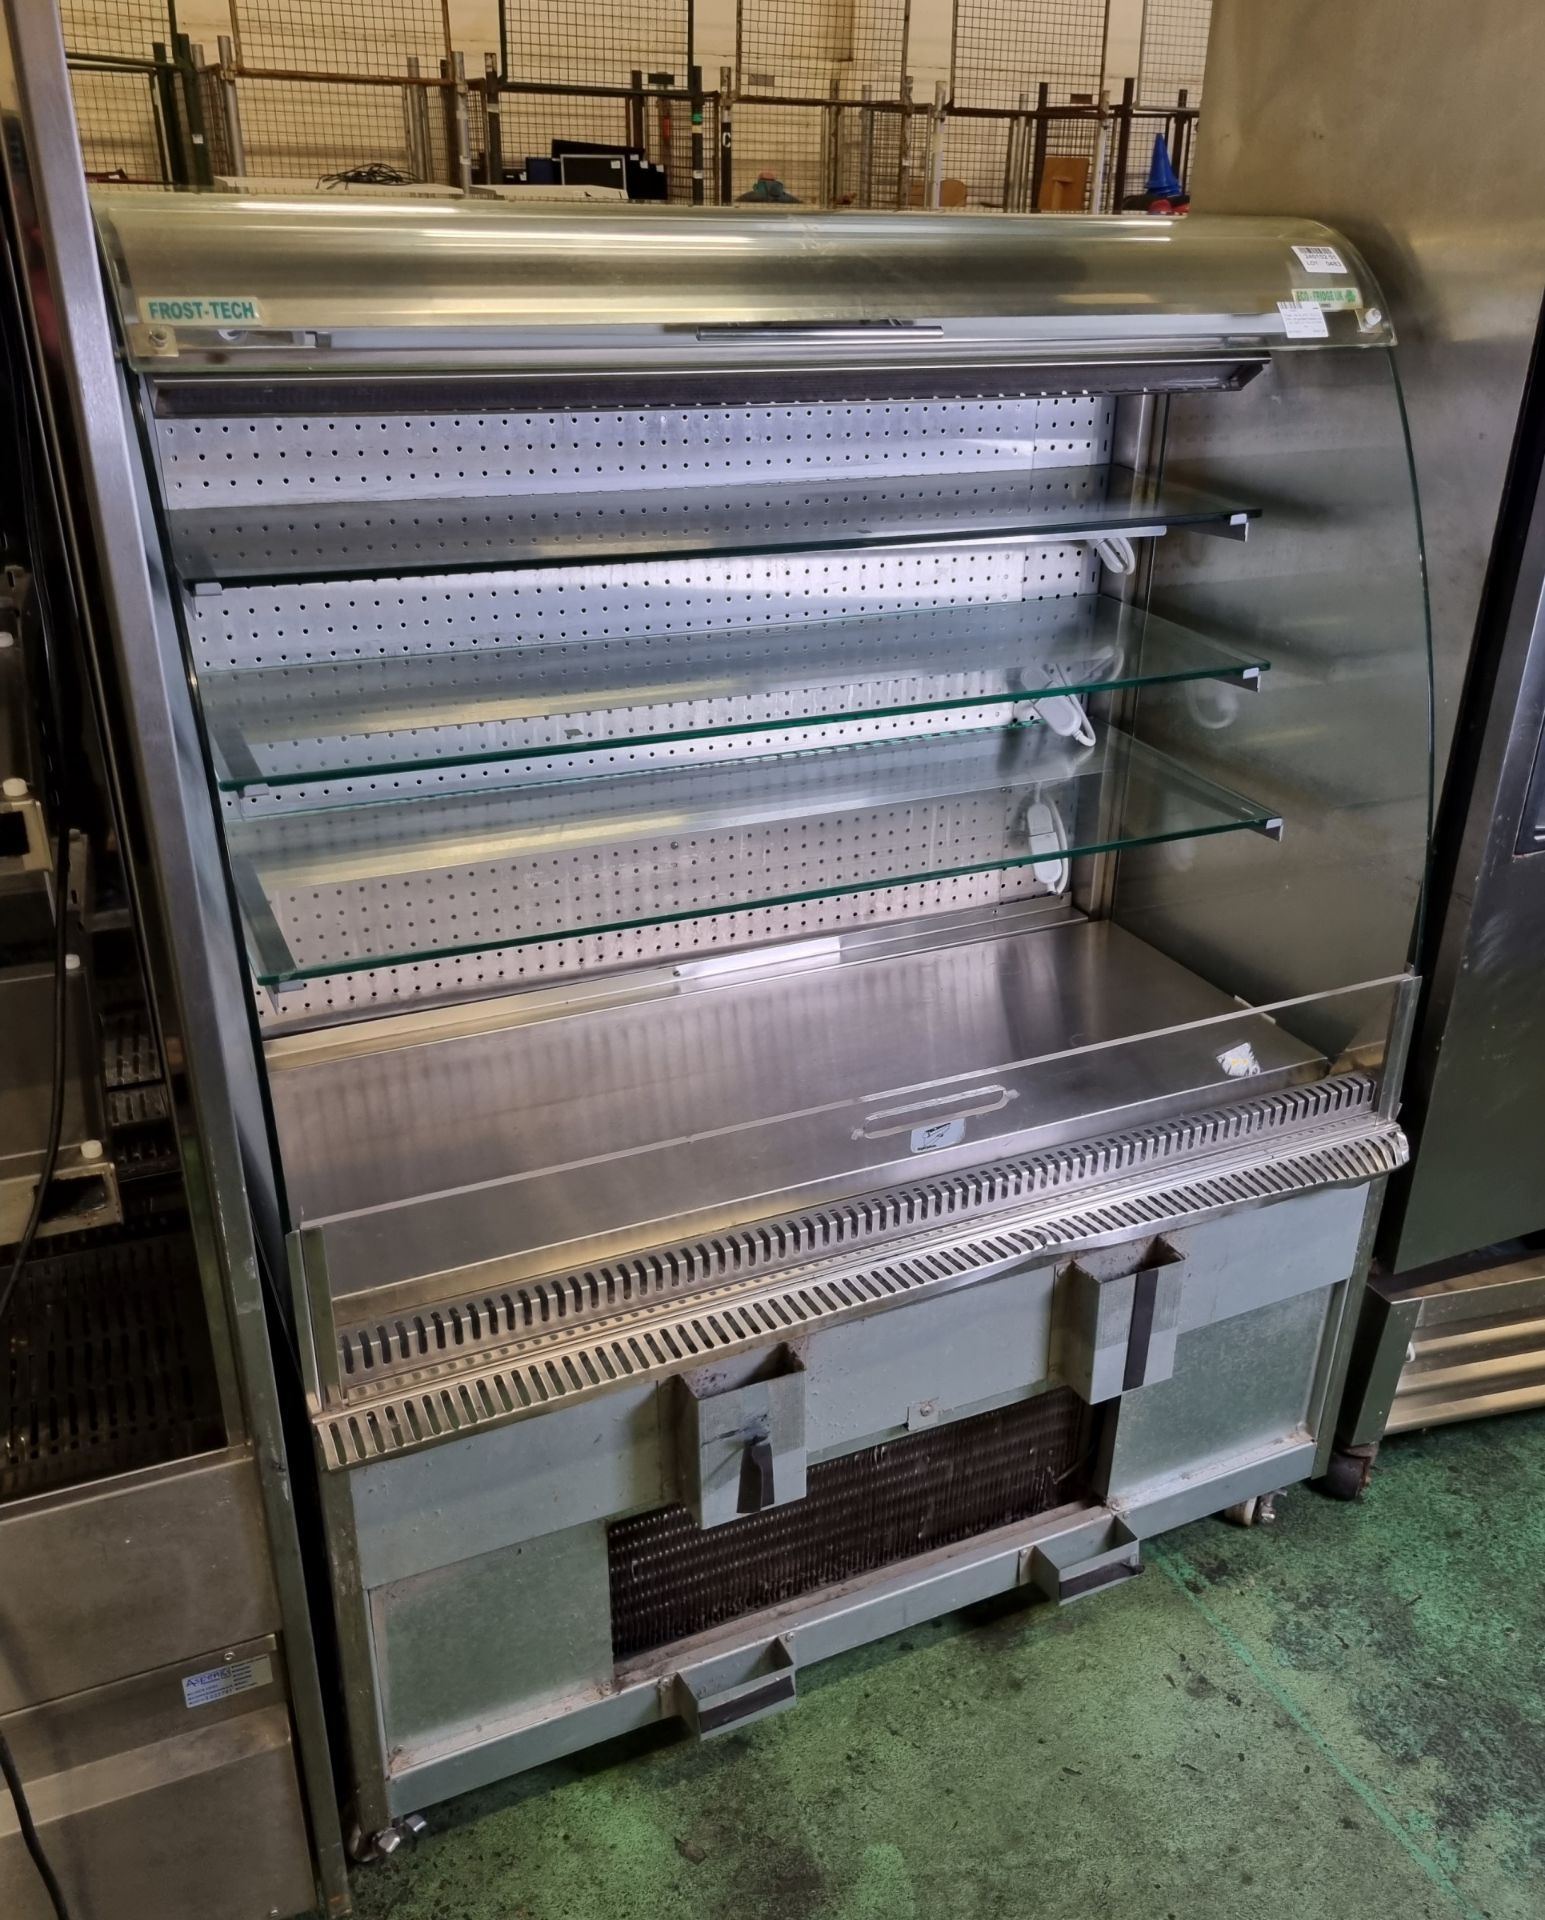 Frost-Tec SLD75/ 120.C.C. 240V refrigerated display unit - W 1200 x D 770 x H 1500mm - Image 2 of 4